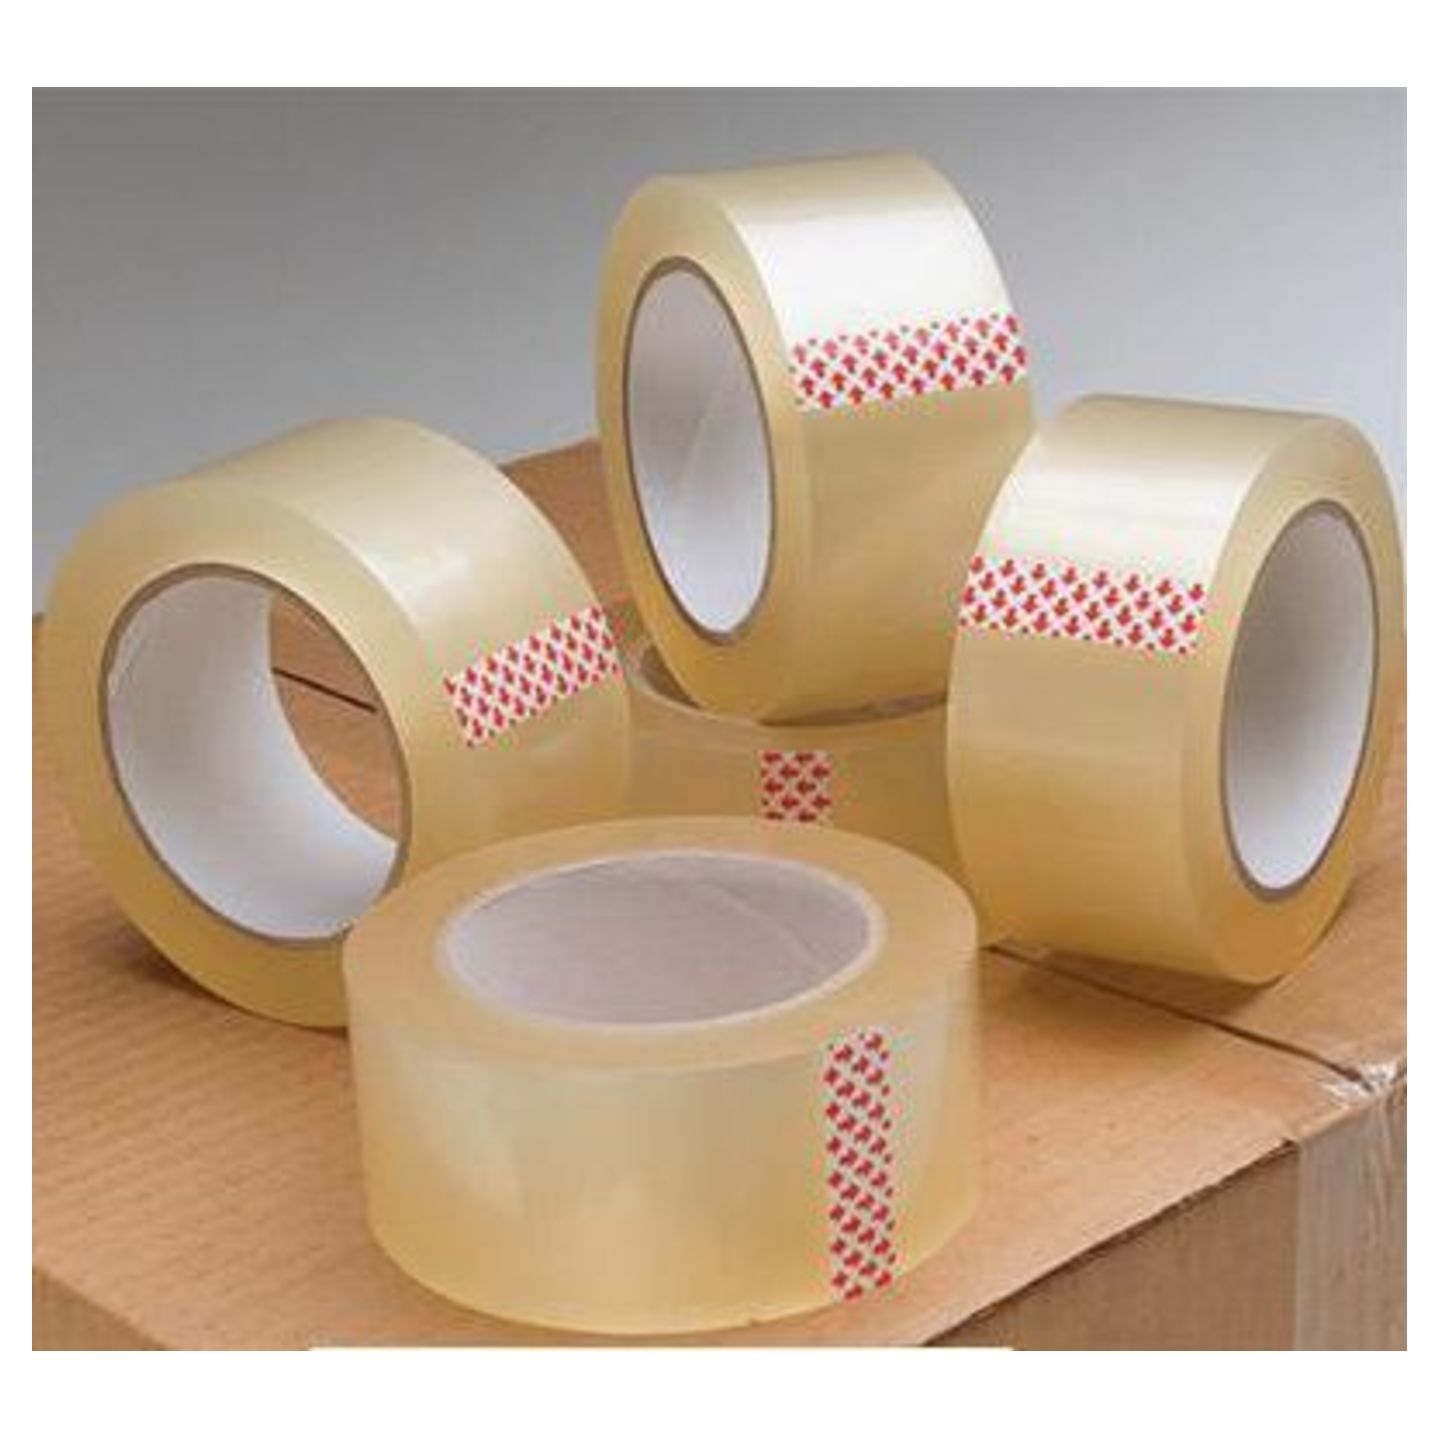 BOPP Adhesive Tapes - 4 inches - Pack of 4